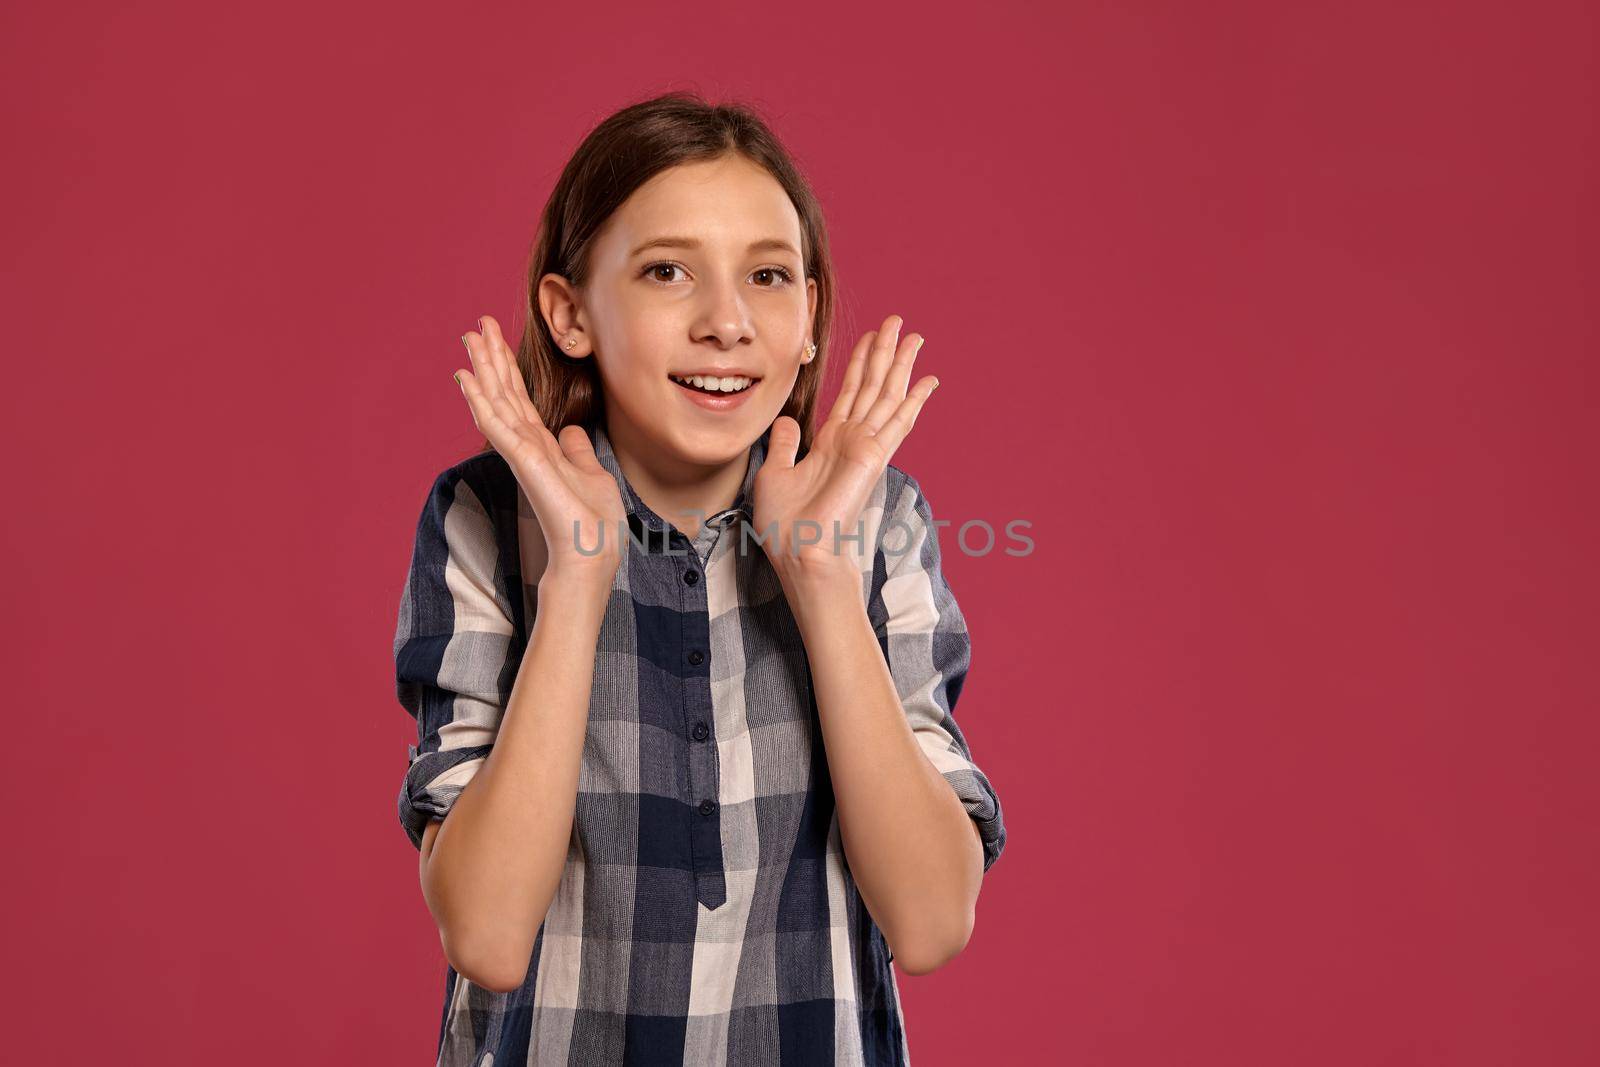 Portrait of a cute teenage female in a casual checkered shirt looking wondered and smiling while posing against a pink studio background. Long hair, healthy clean skin and brown eyes. Sincere emotions concept. Copy space.